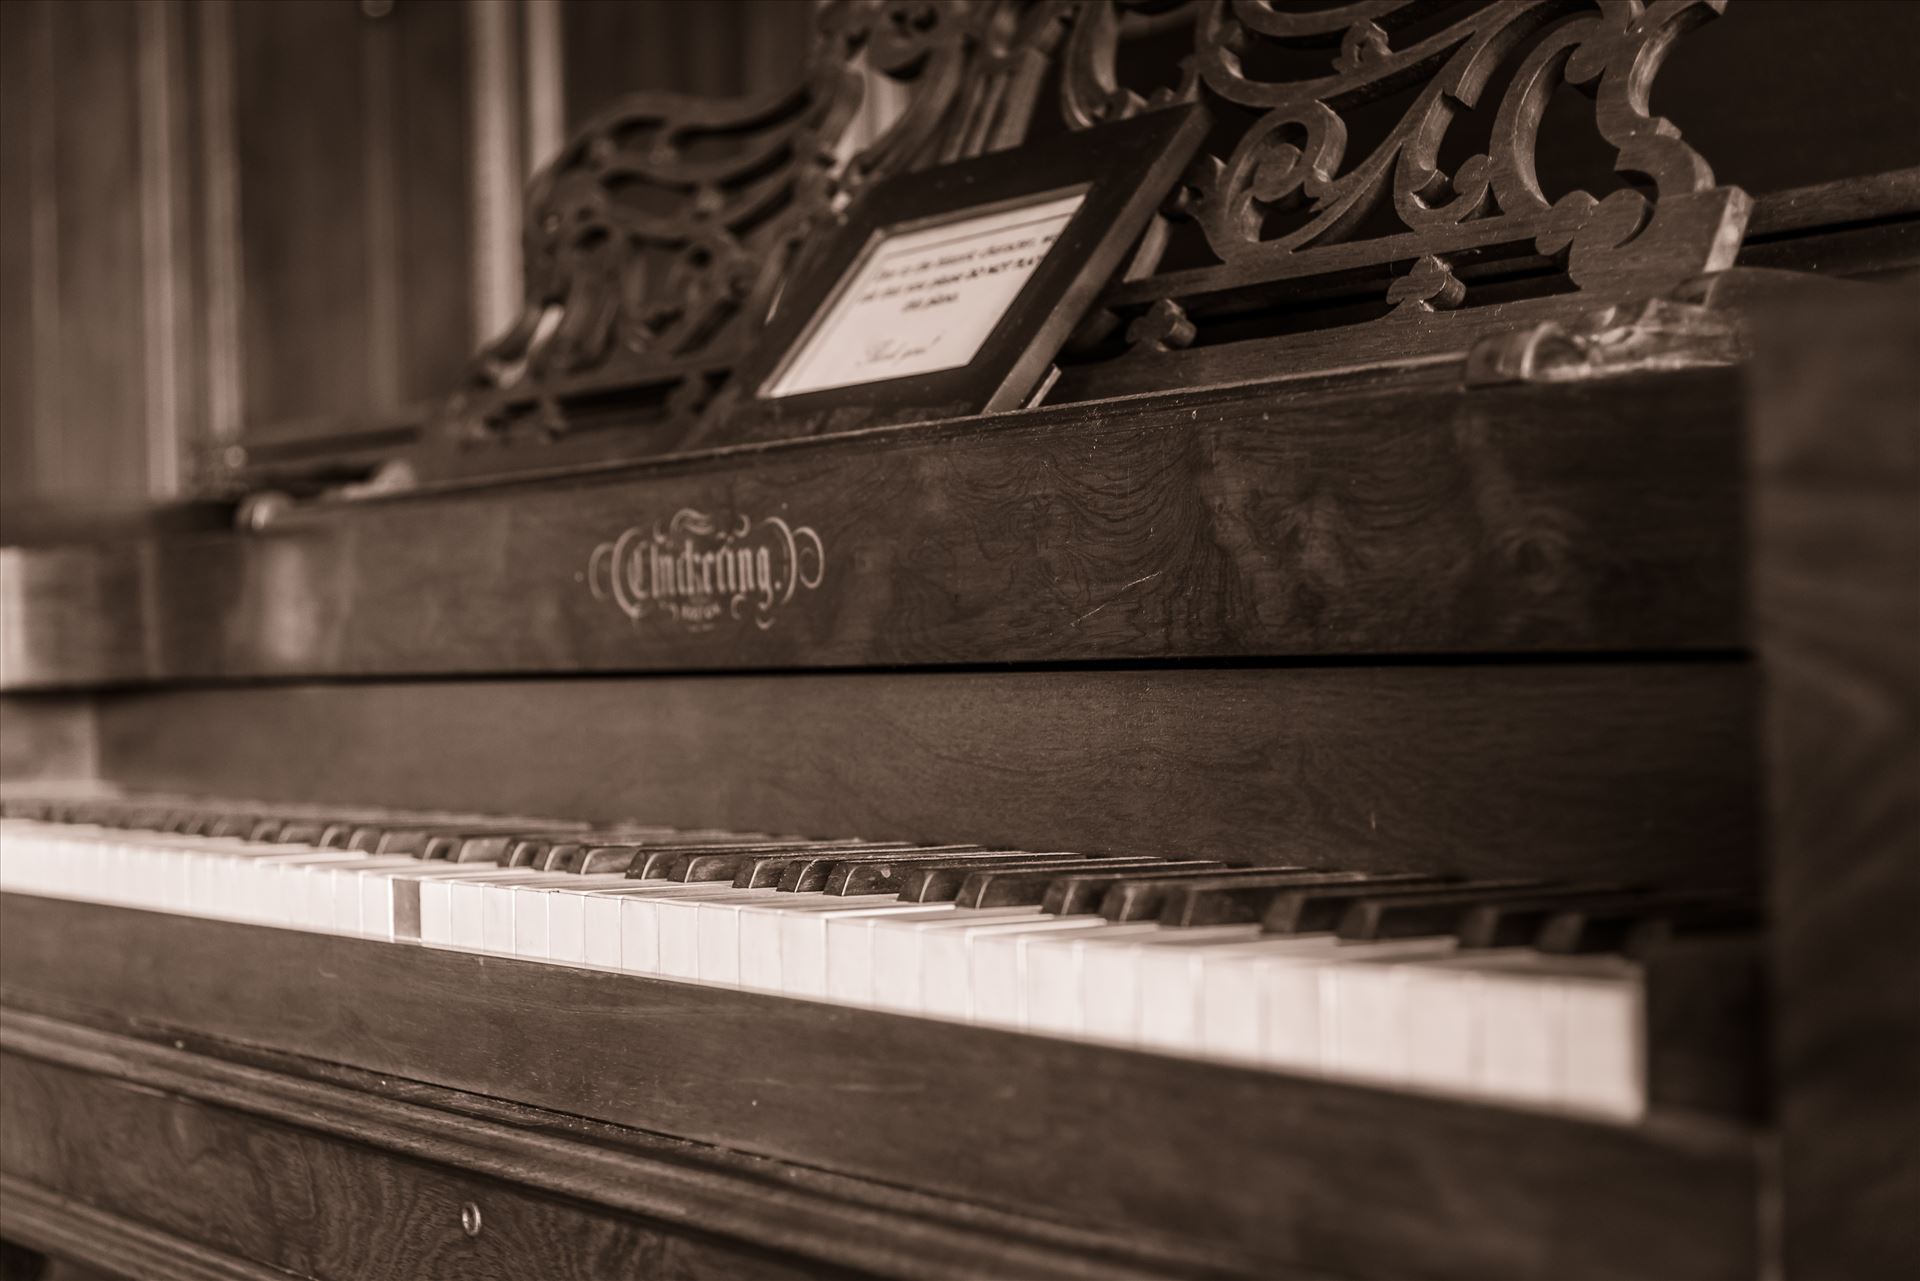 Stanley Hotel Piano Close Up FP (1 of 1).JPG  by Sarah Williams